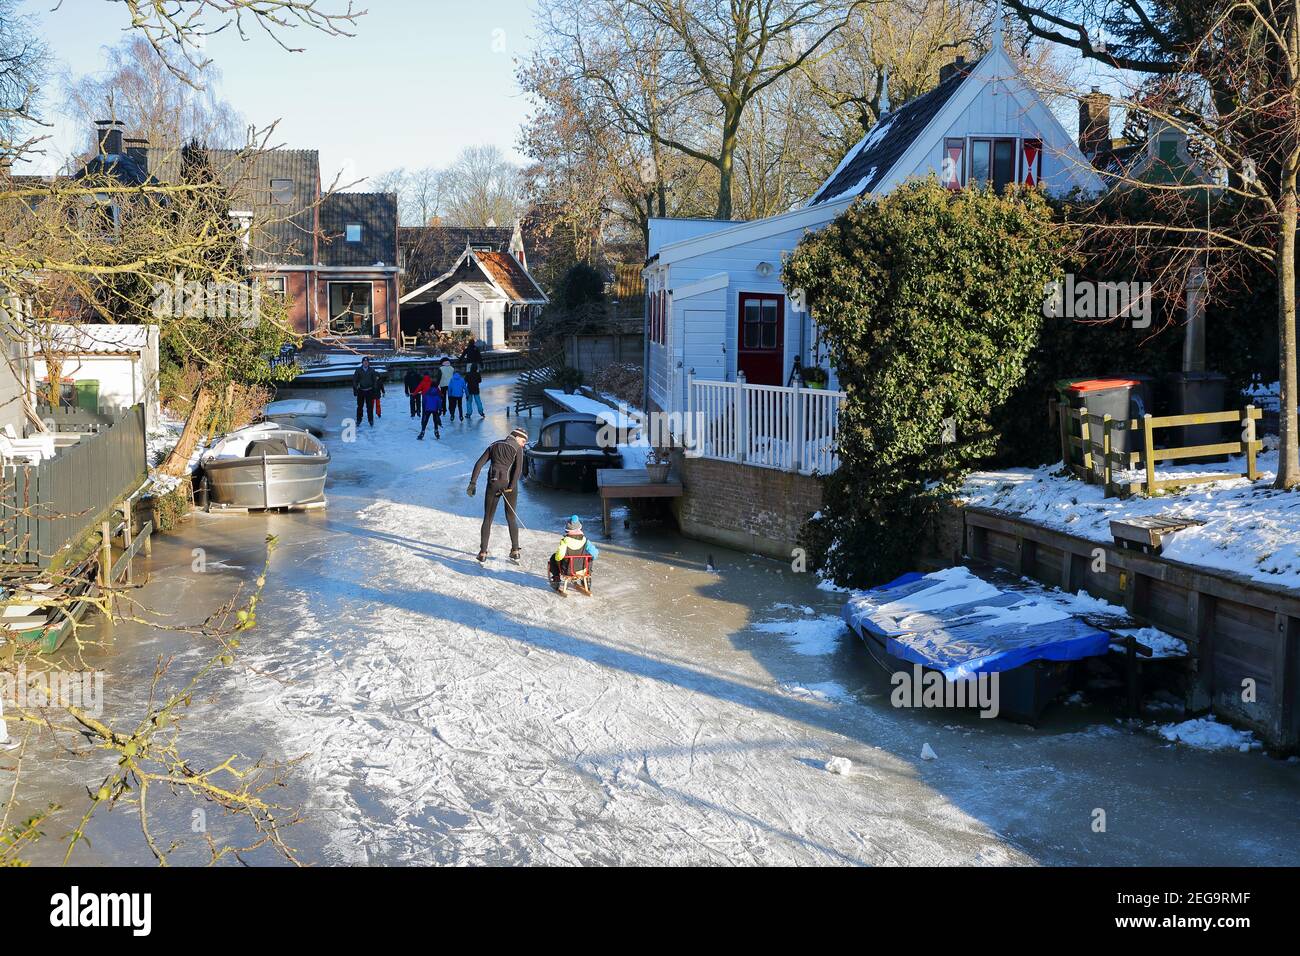 BROEK IN WATERLAND, NETHERLANDS - FEBRUARY 13, 2020: Winter snow and people ice skating on frozen canals in Broek in Waterland Stock Photo